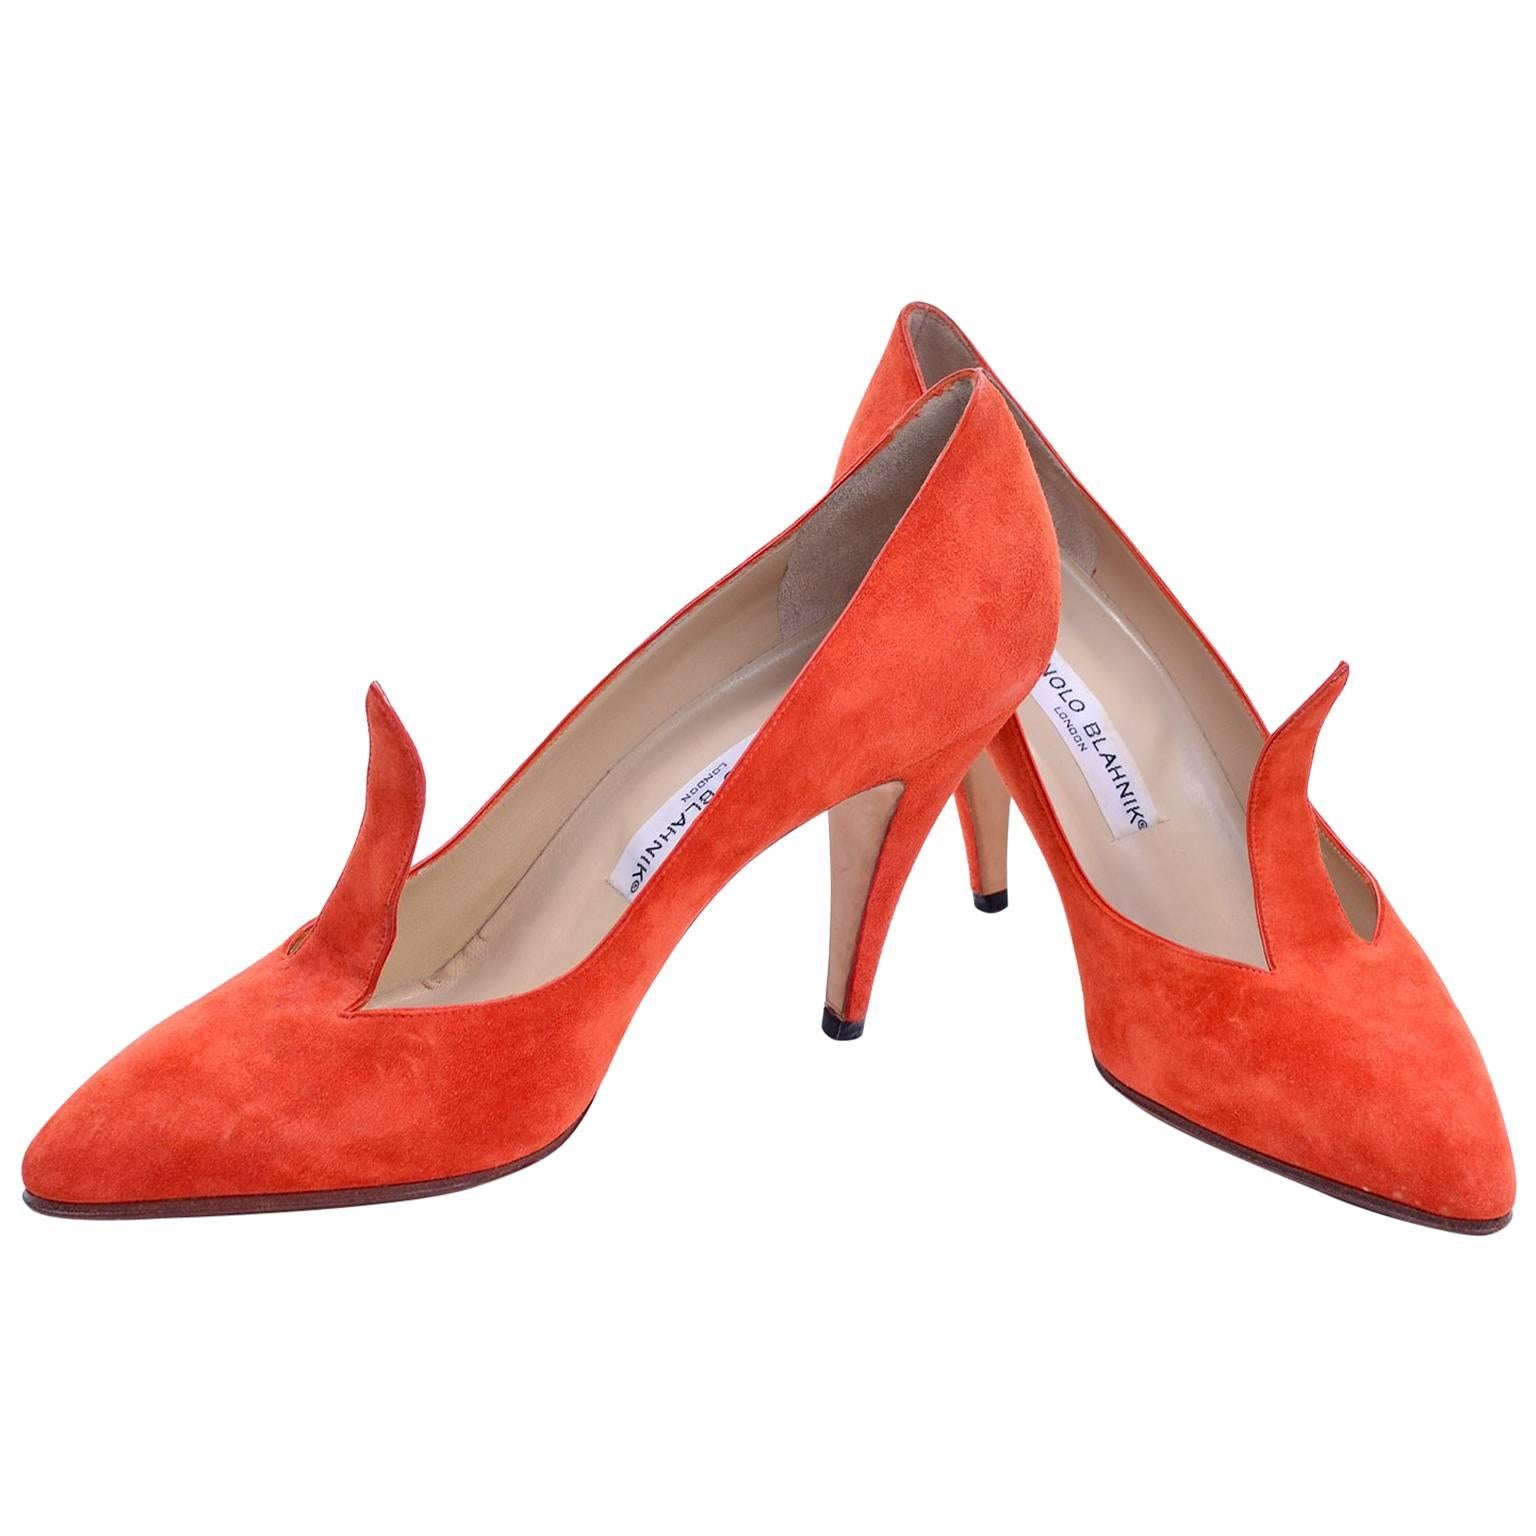 Manolo Blahnik Vintage Orange Suede Fall Shoes with Flame 